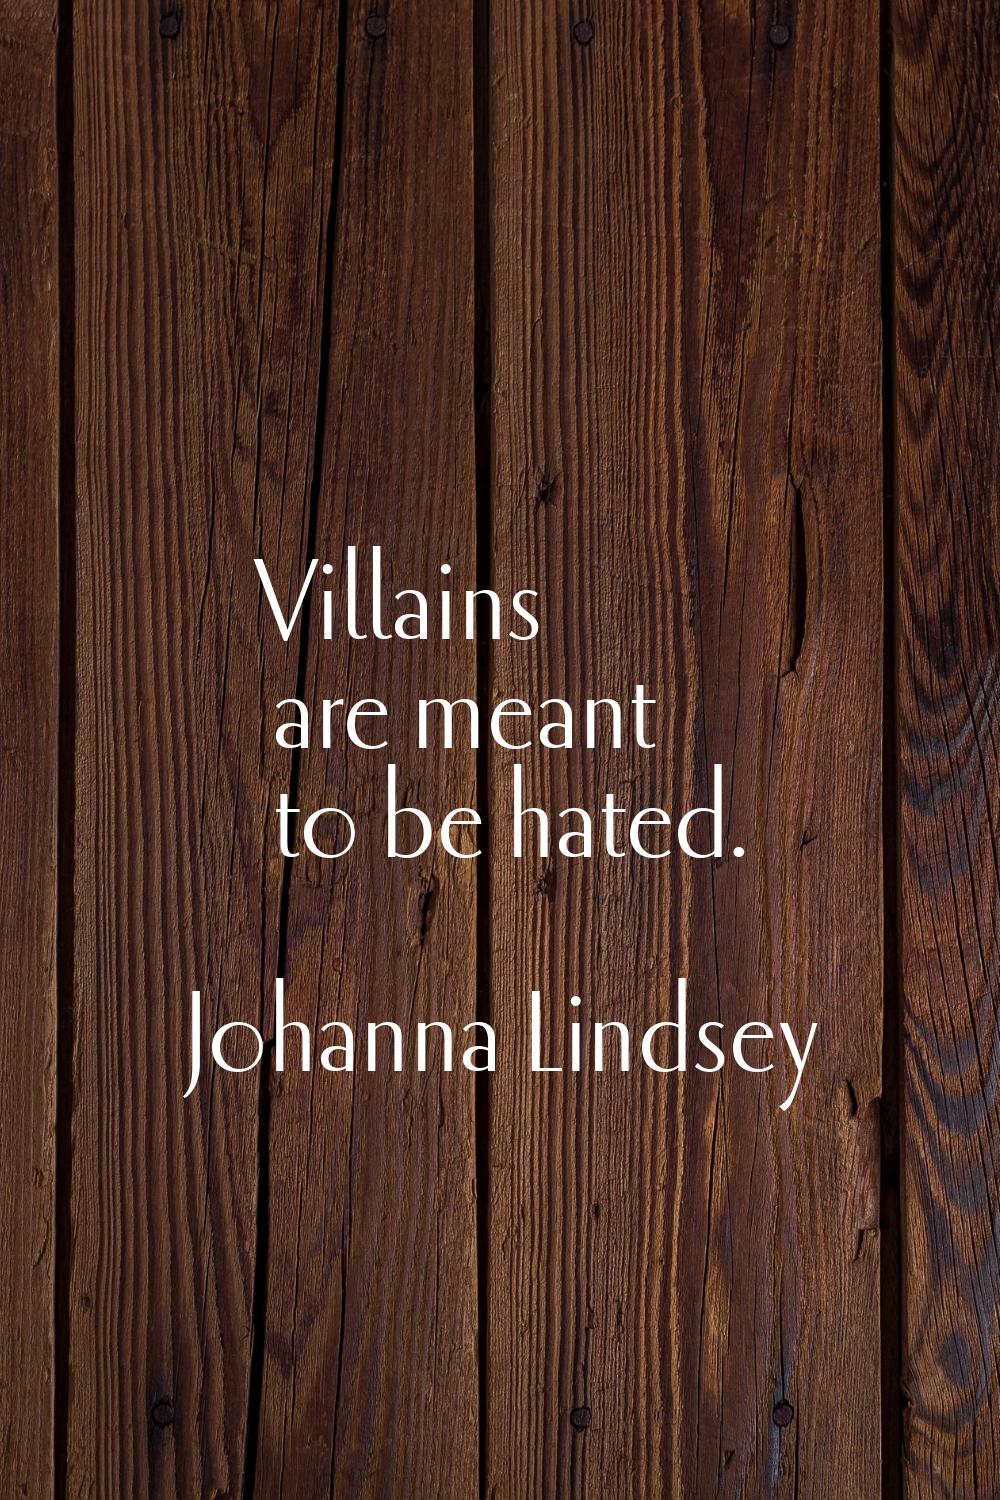 Villains are meant to be hated.